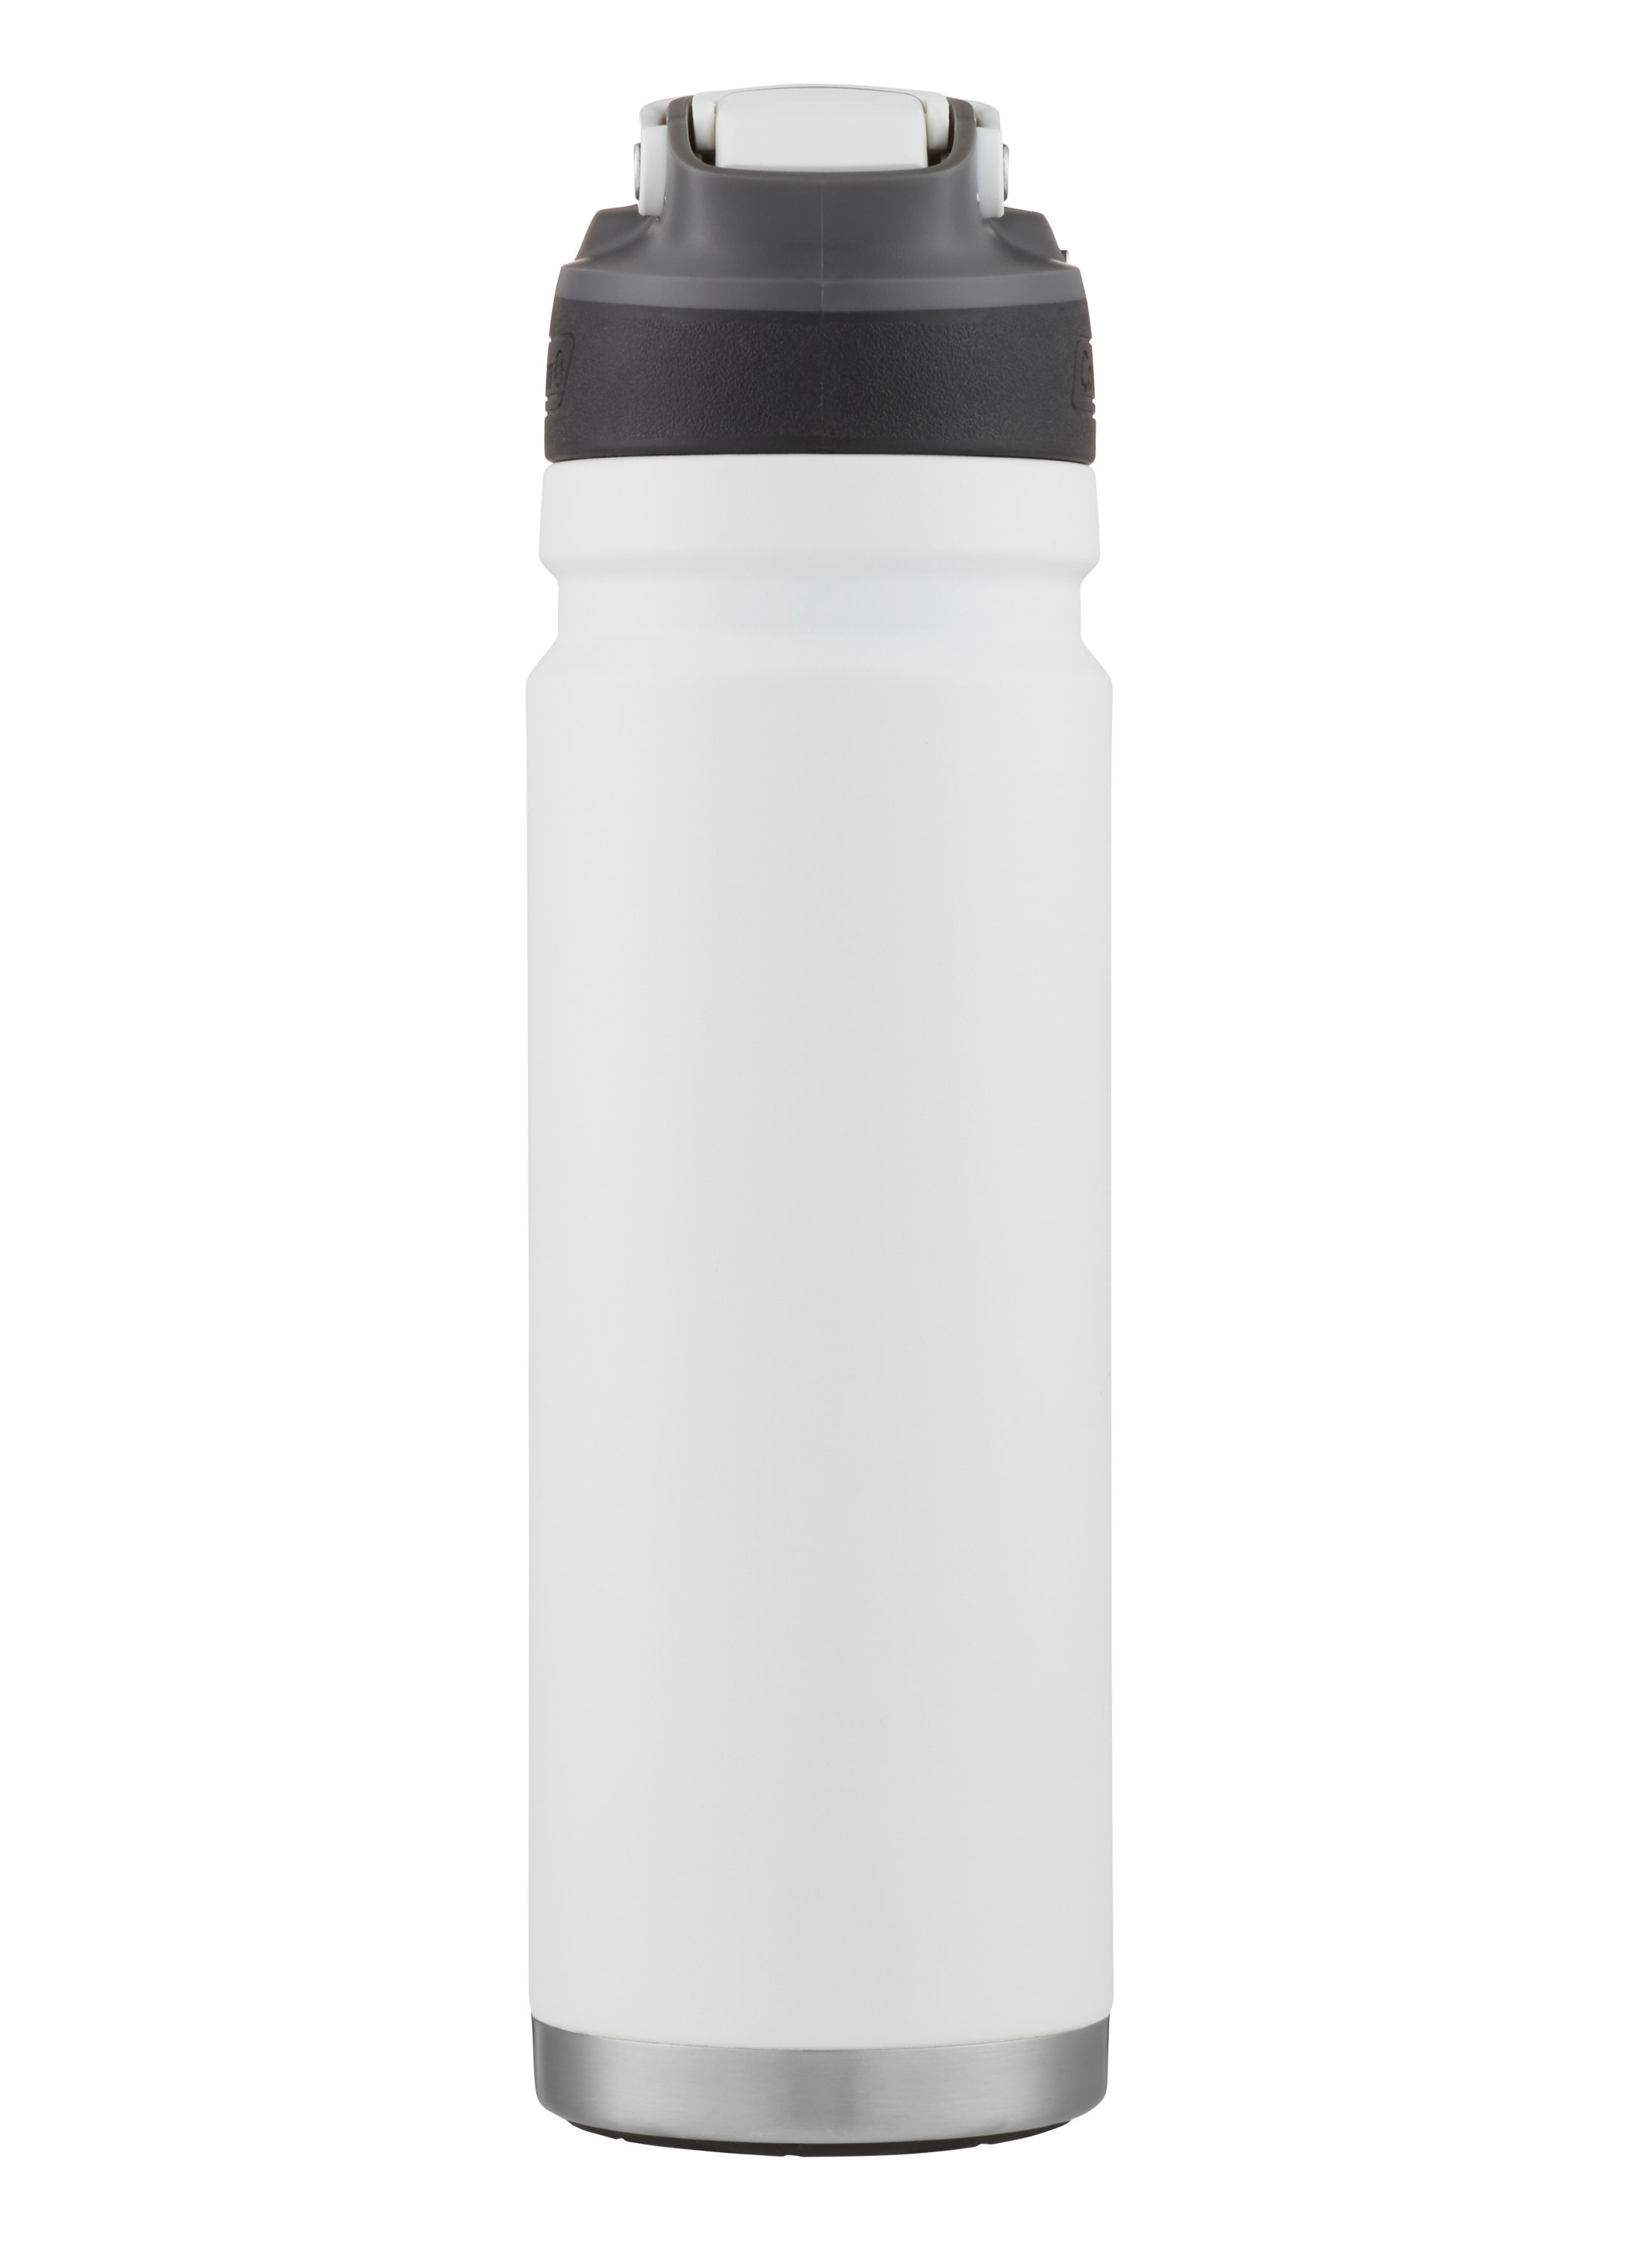 Coleman Switch Autospout Stainless Steel Insulated Water Bottle, 24 oz., White Cloud - image 2 of 9